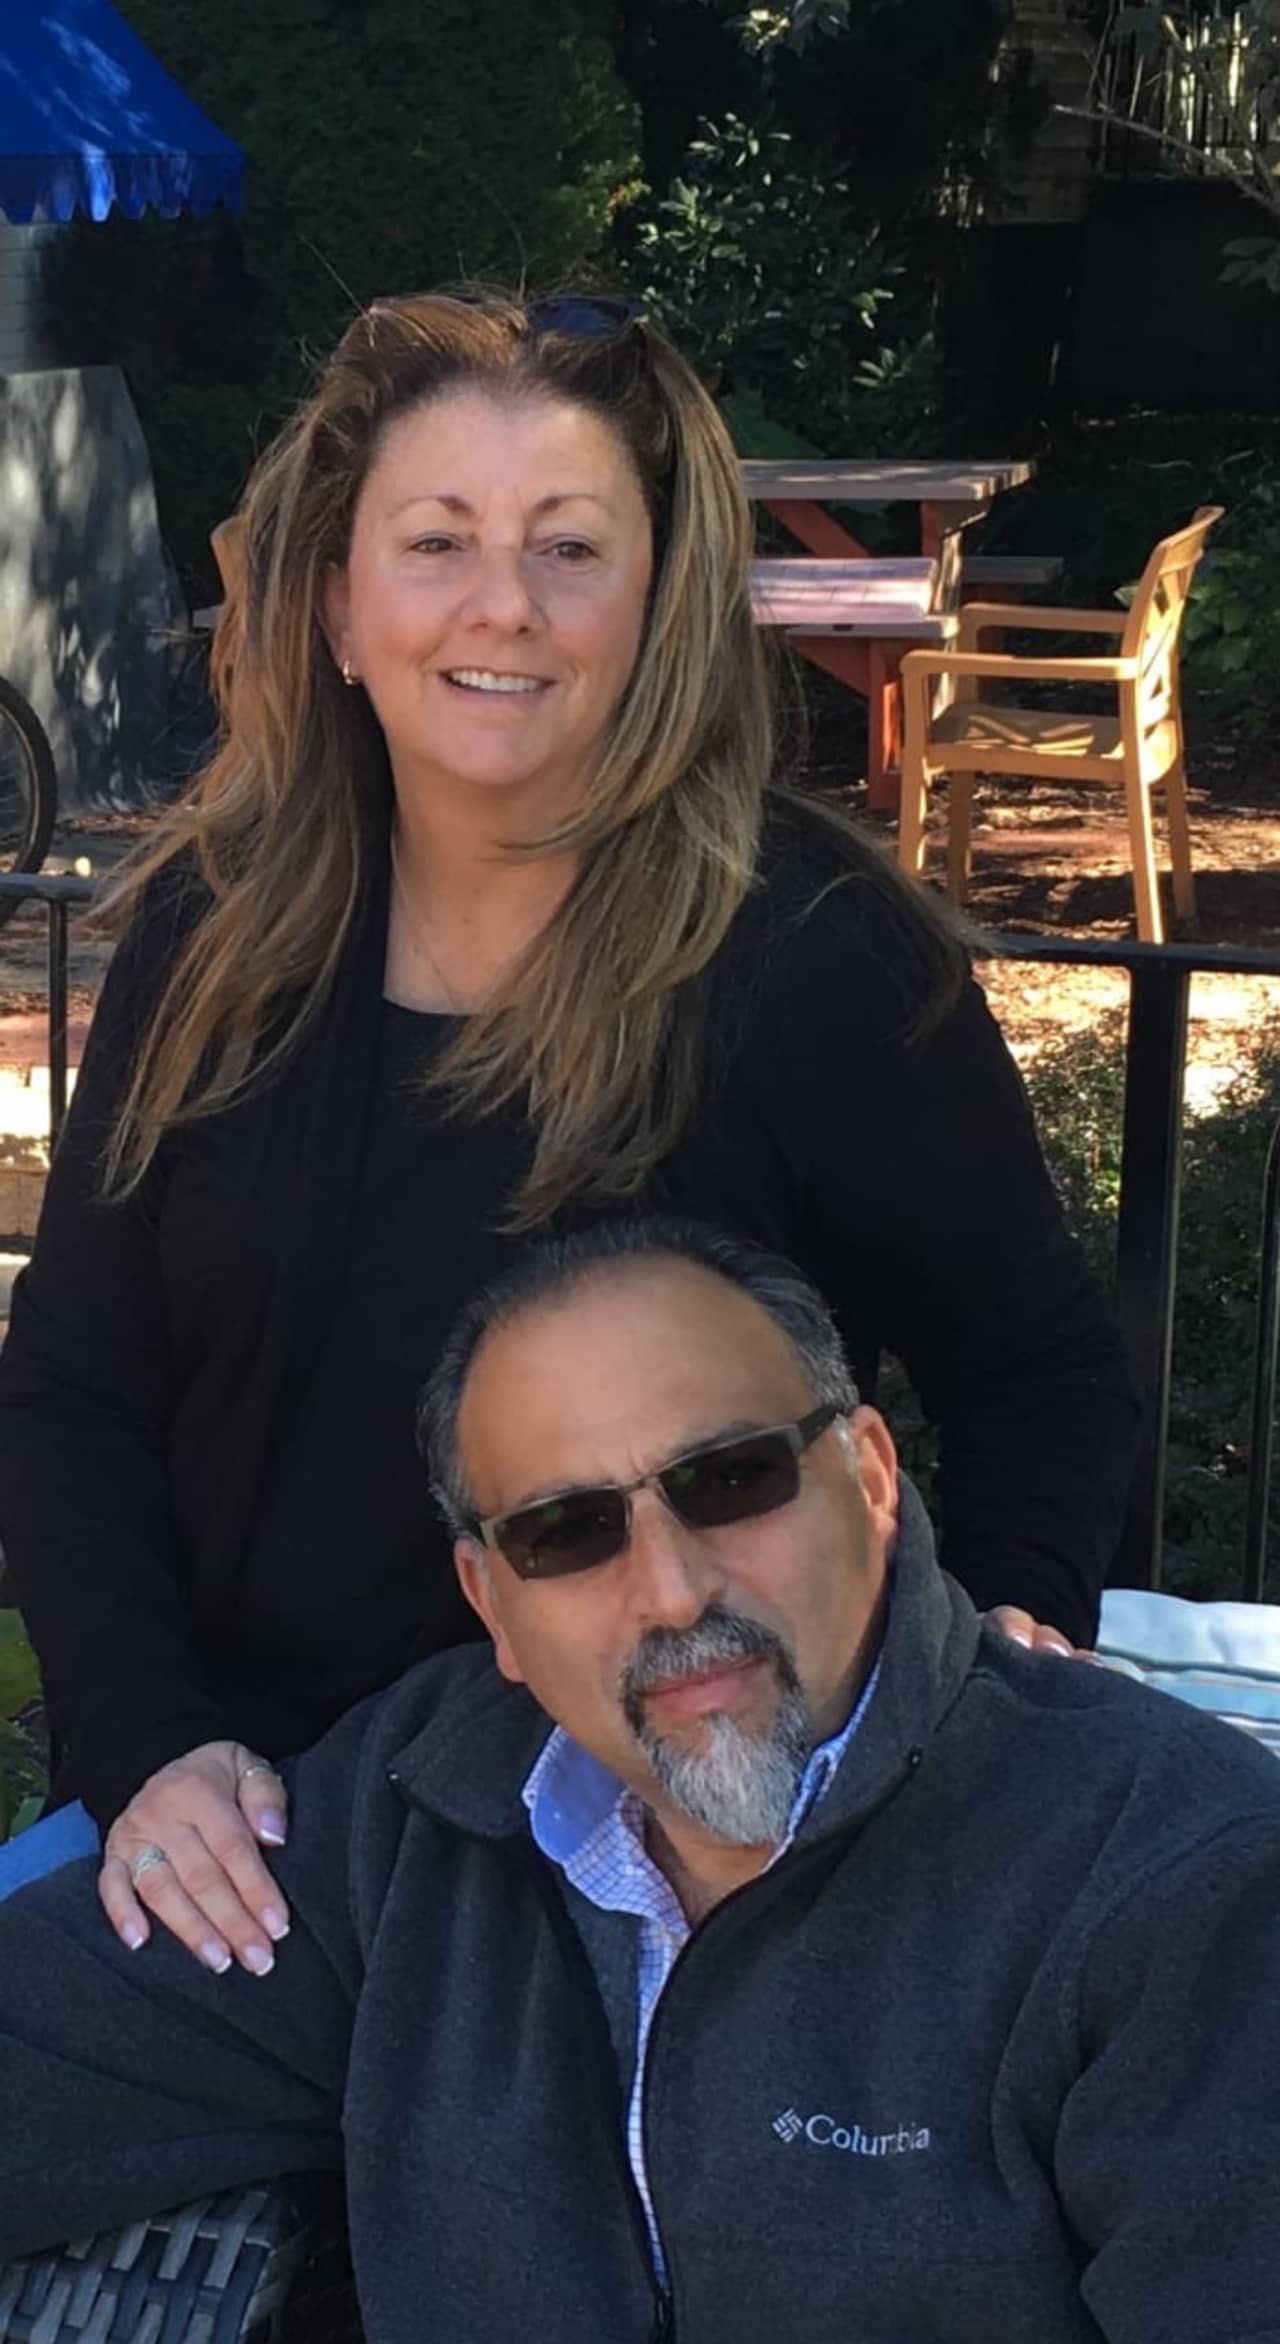 Al Borrelli and his wife Kris have served Westchester County for over 30 years.